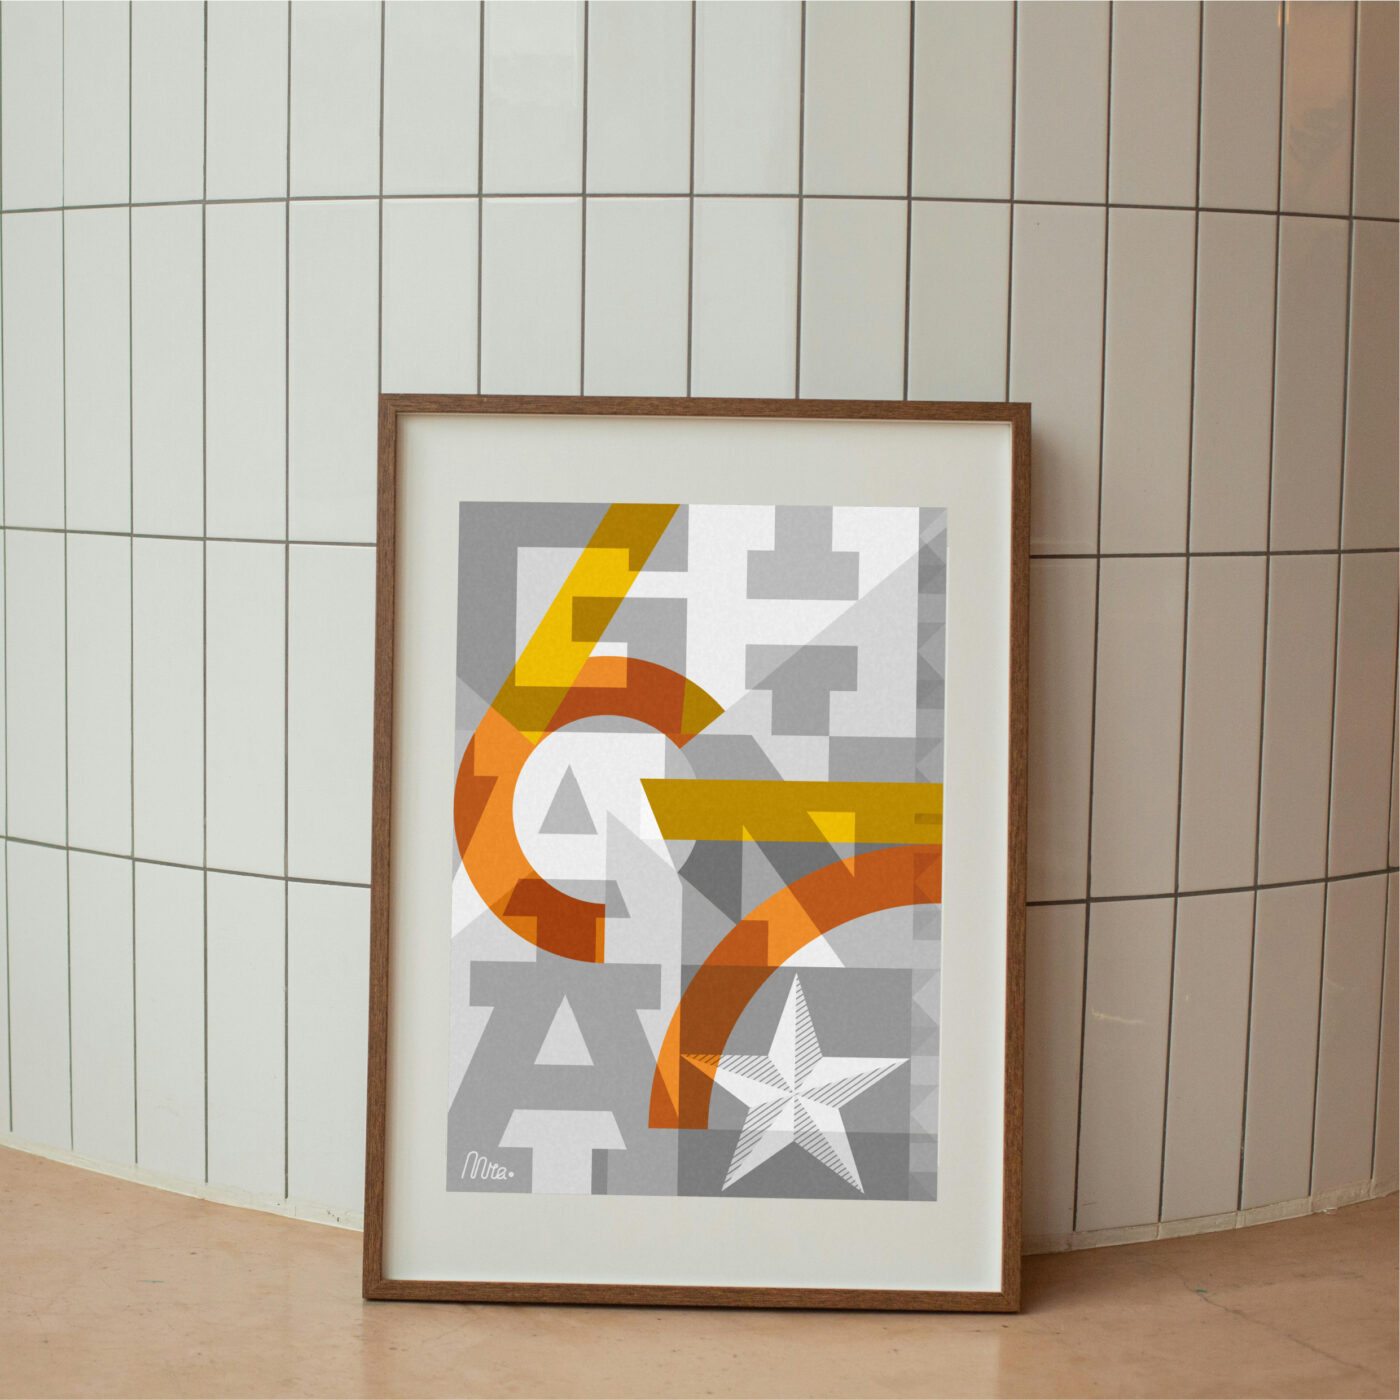 Colourful poster of abstract shapes that layer the stylized letters of 'Ghana' with a beveled star, and the figures '67'